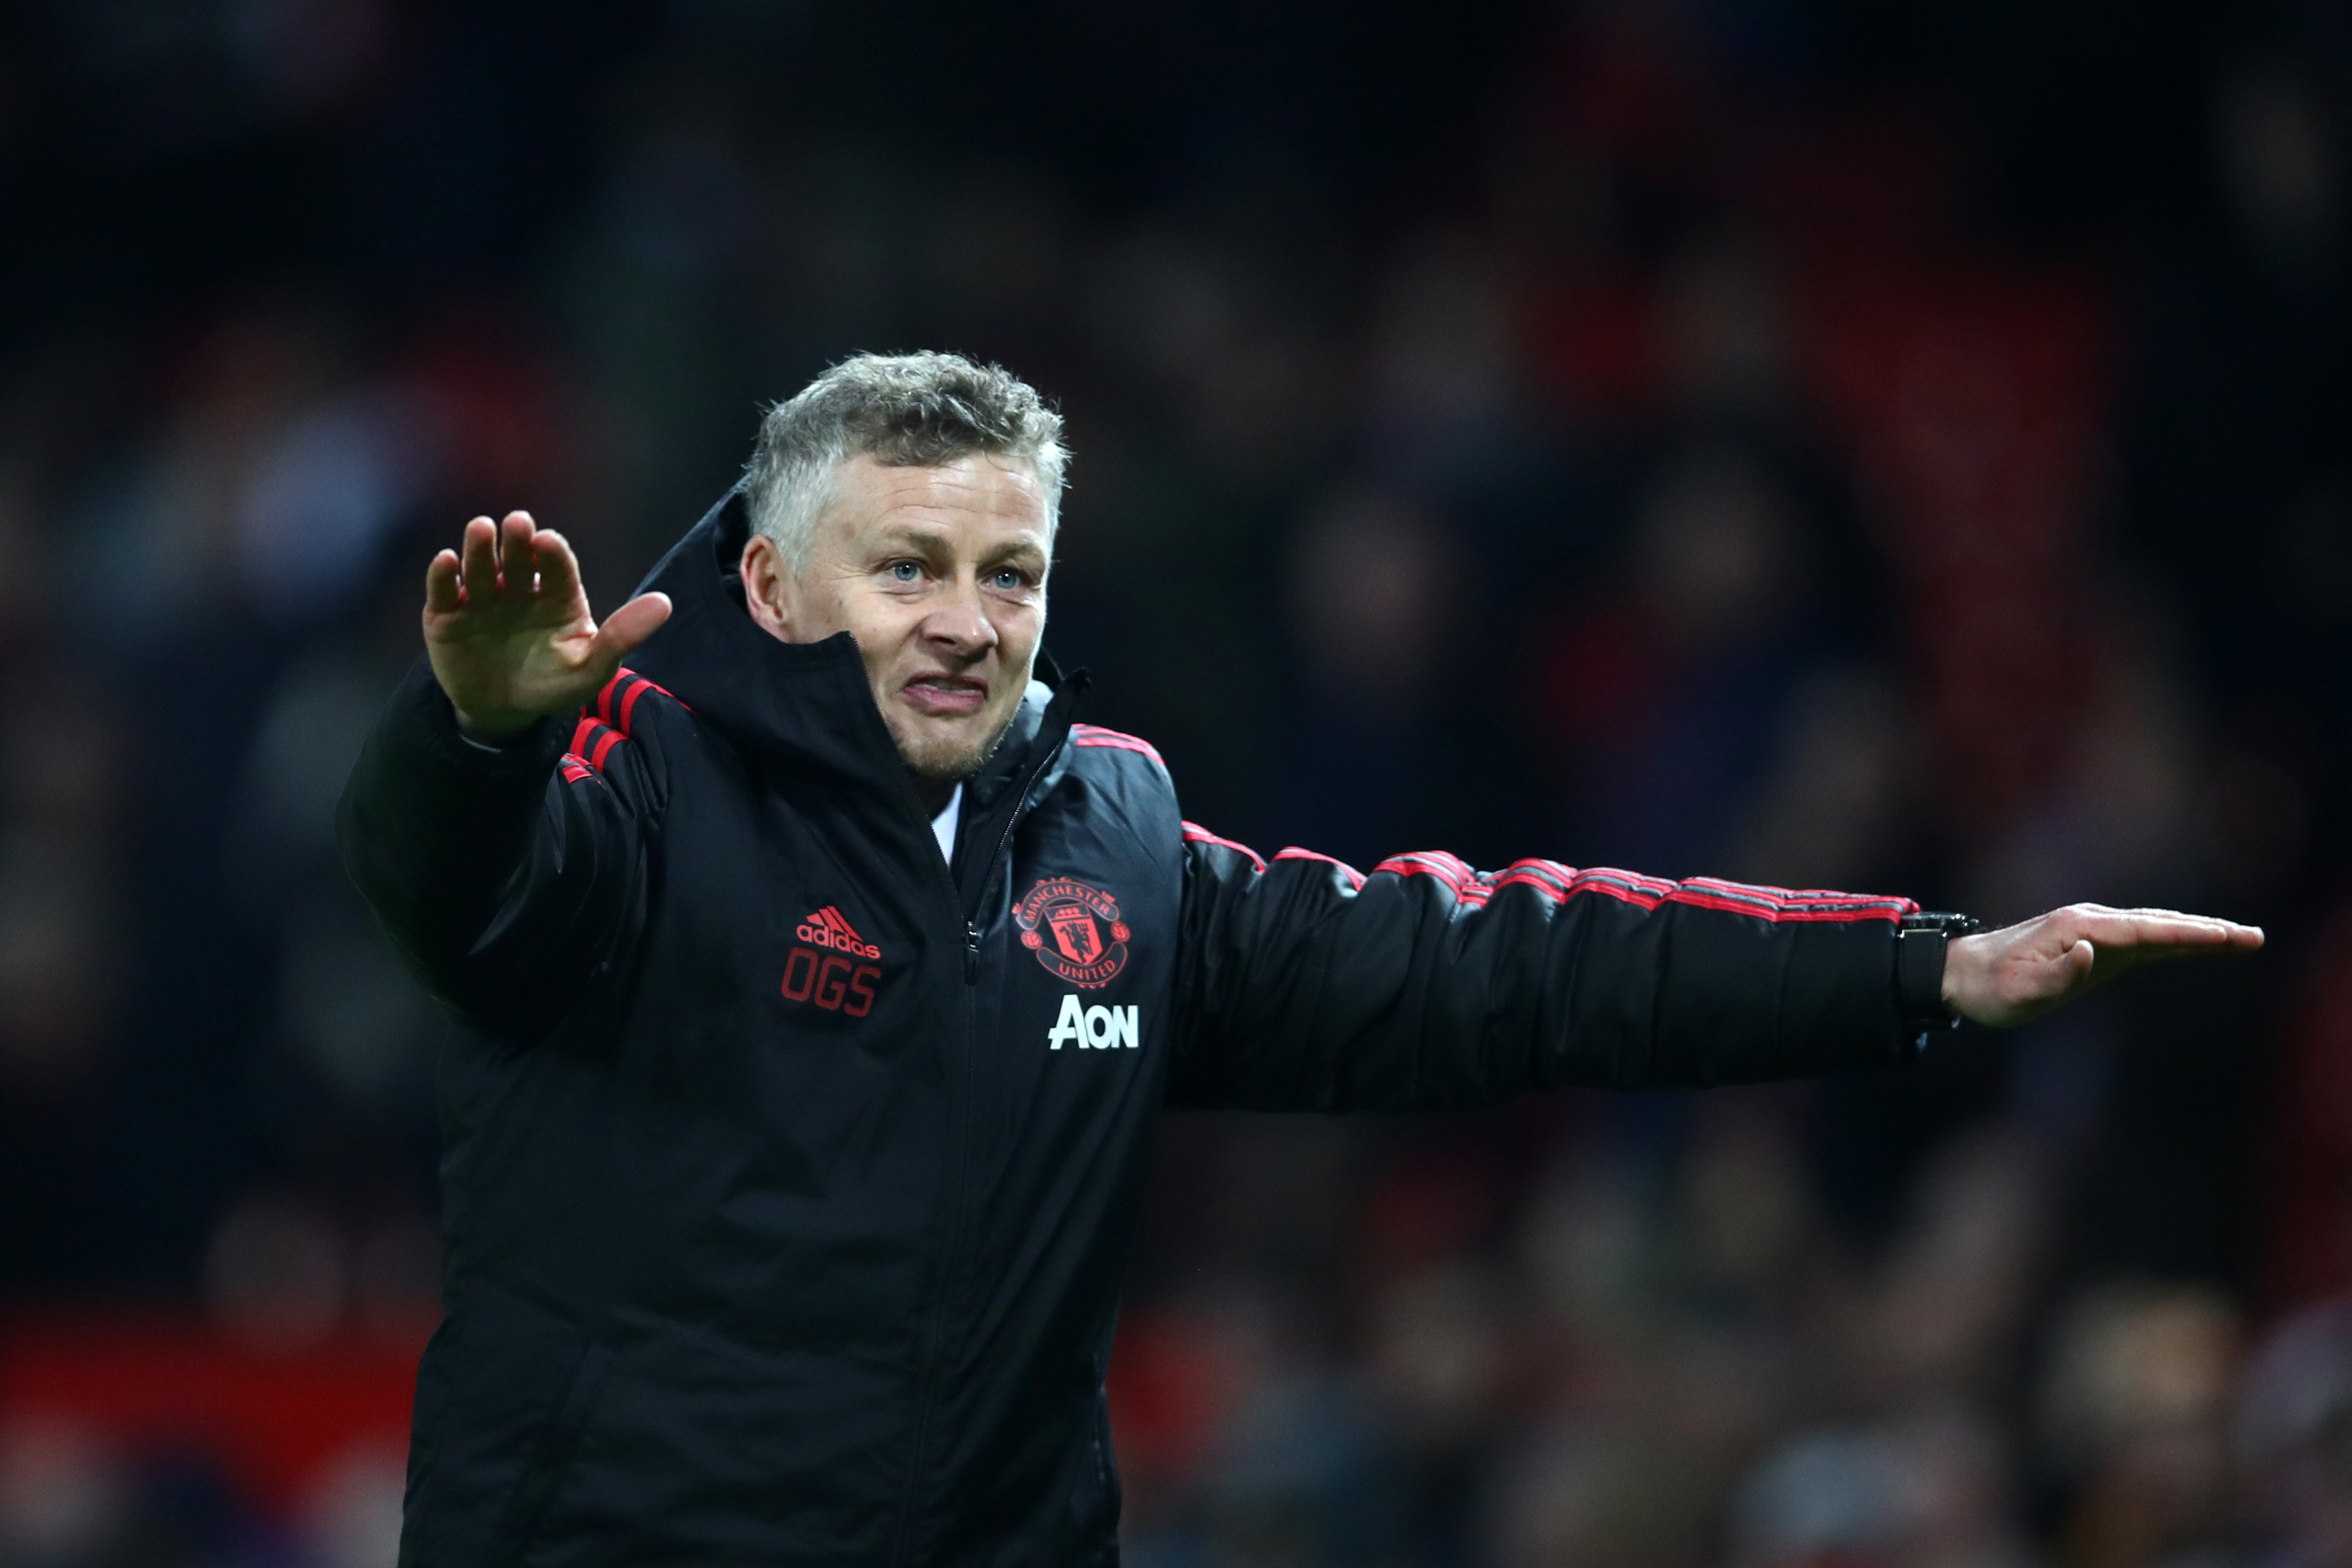 MANCHESTER, ENGLAND - DECEMBER 26:  Ole Gunnar Solskjaer, Interim Manager of Manchester United celebrates following his sides victory in the Premier League match between Manchester United and Huddersfield Town at Old Trafford on December 26, 2018 in Manchester, United Kingdom.  (Photo by Clive Brunskill/Getty Images)